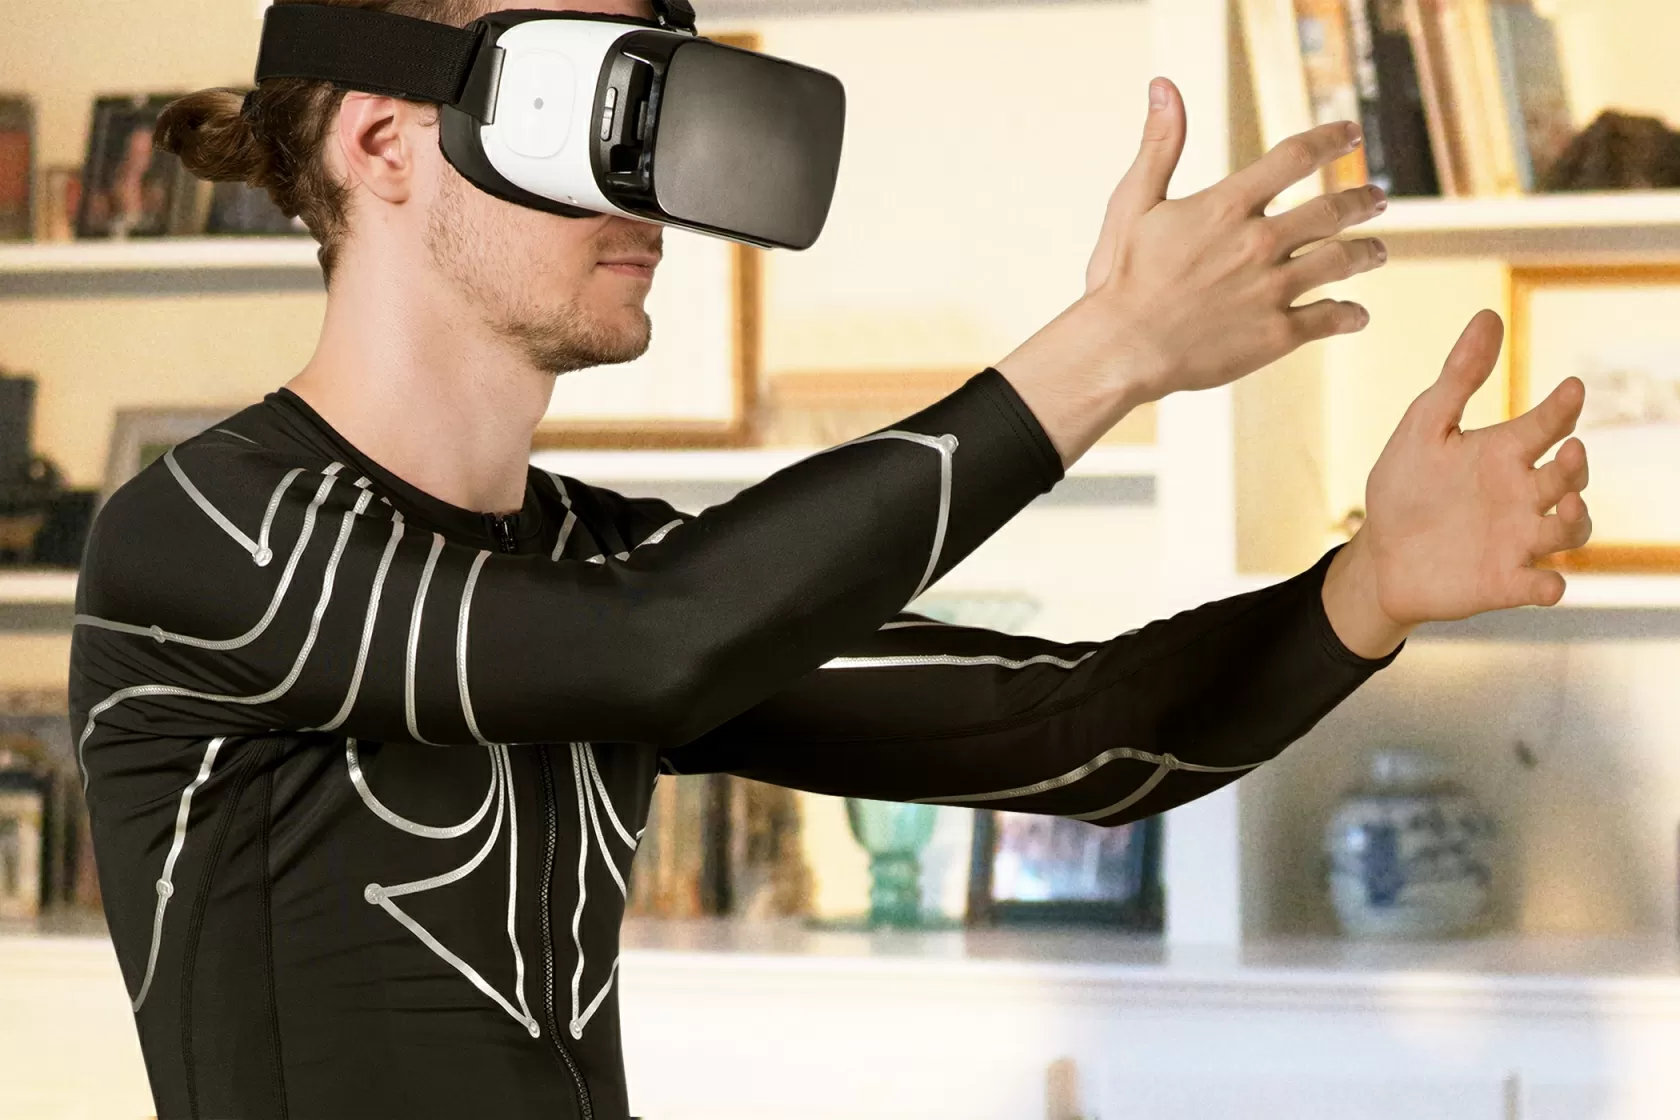 Your body is the controller with this wireless 'e-skin' shirt for HoloLens